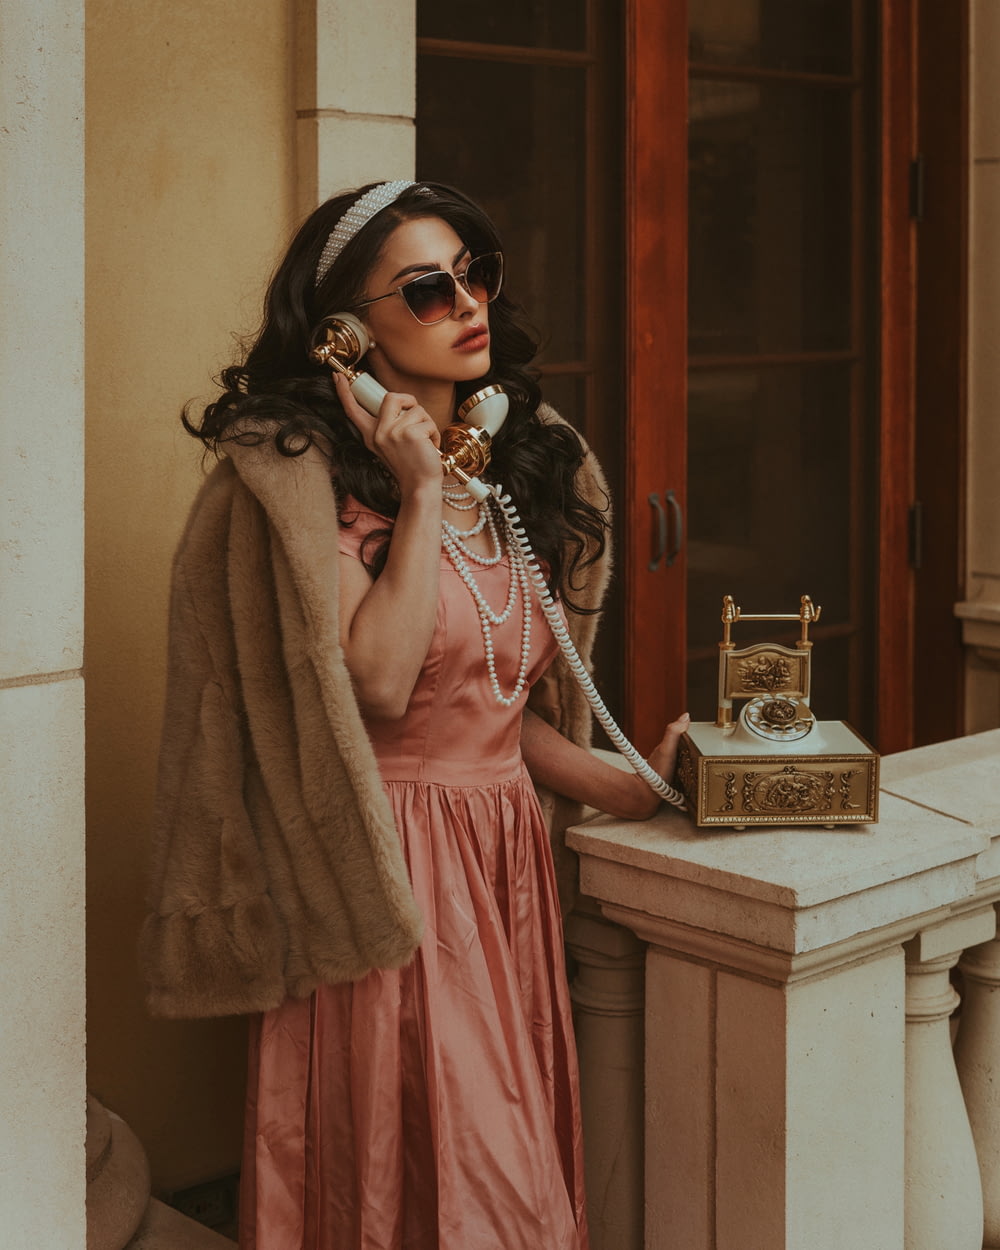 a woman in a pink dress talking on a phone